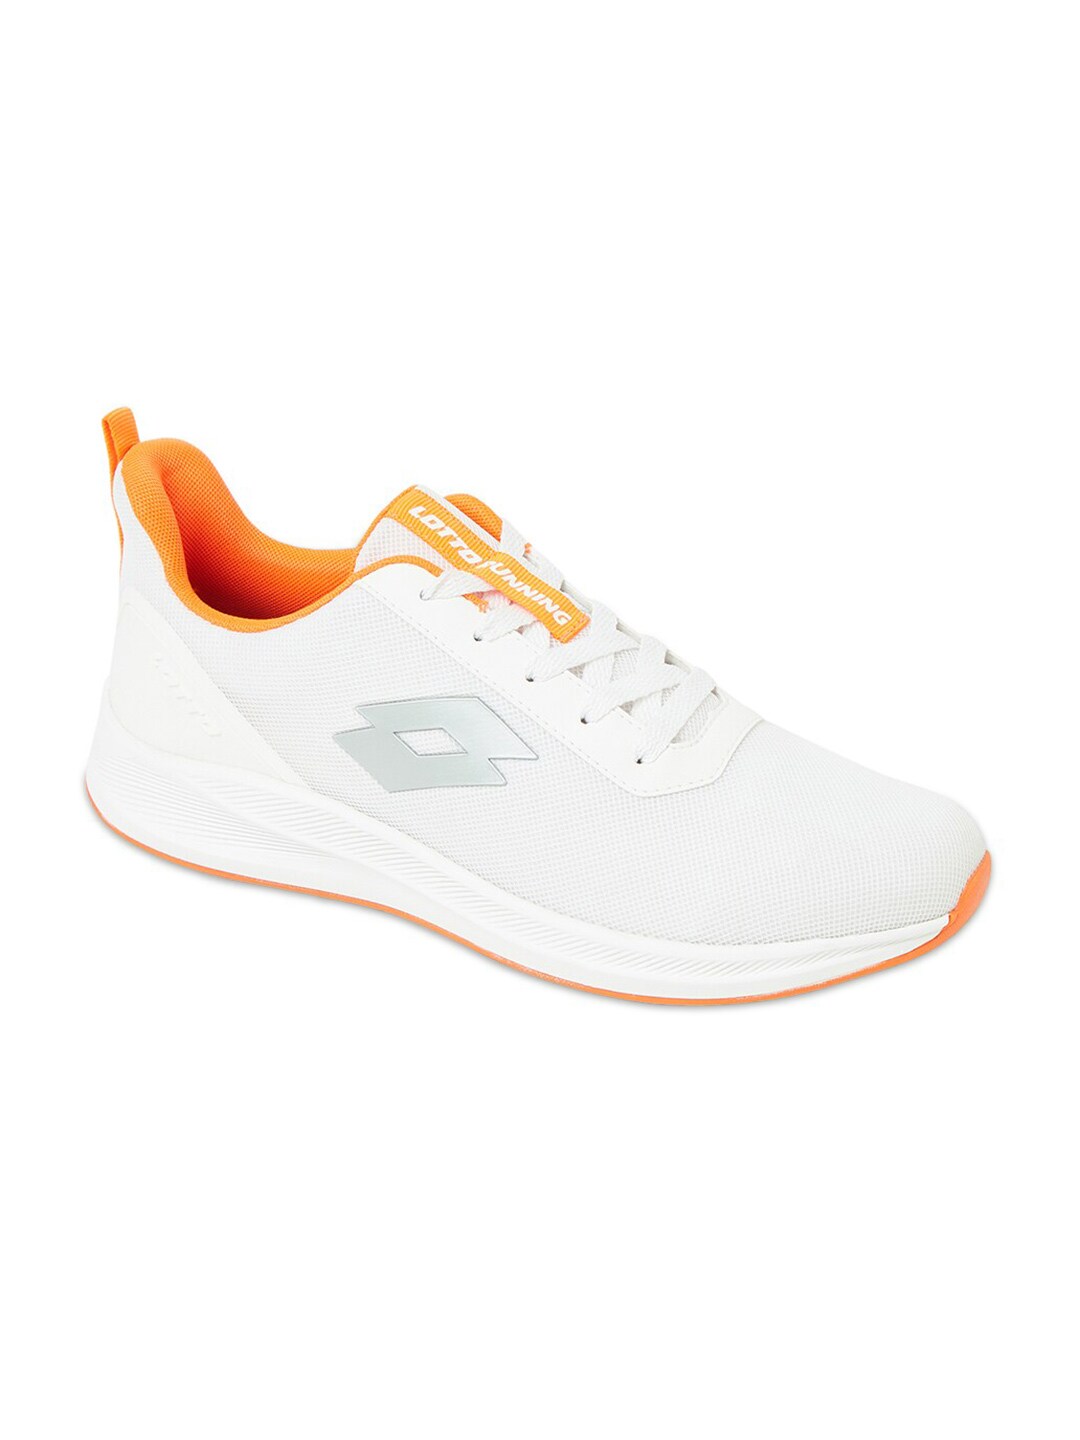 Buy Lotto Men White Running Shoes - Sports Shoes for Men 1142413 | Myntra